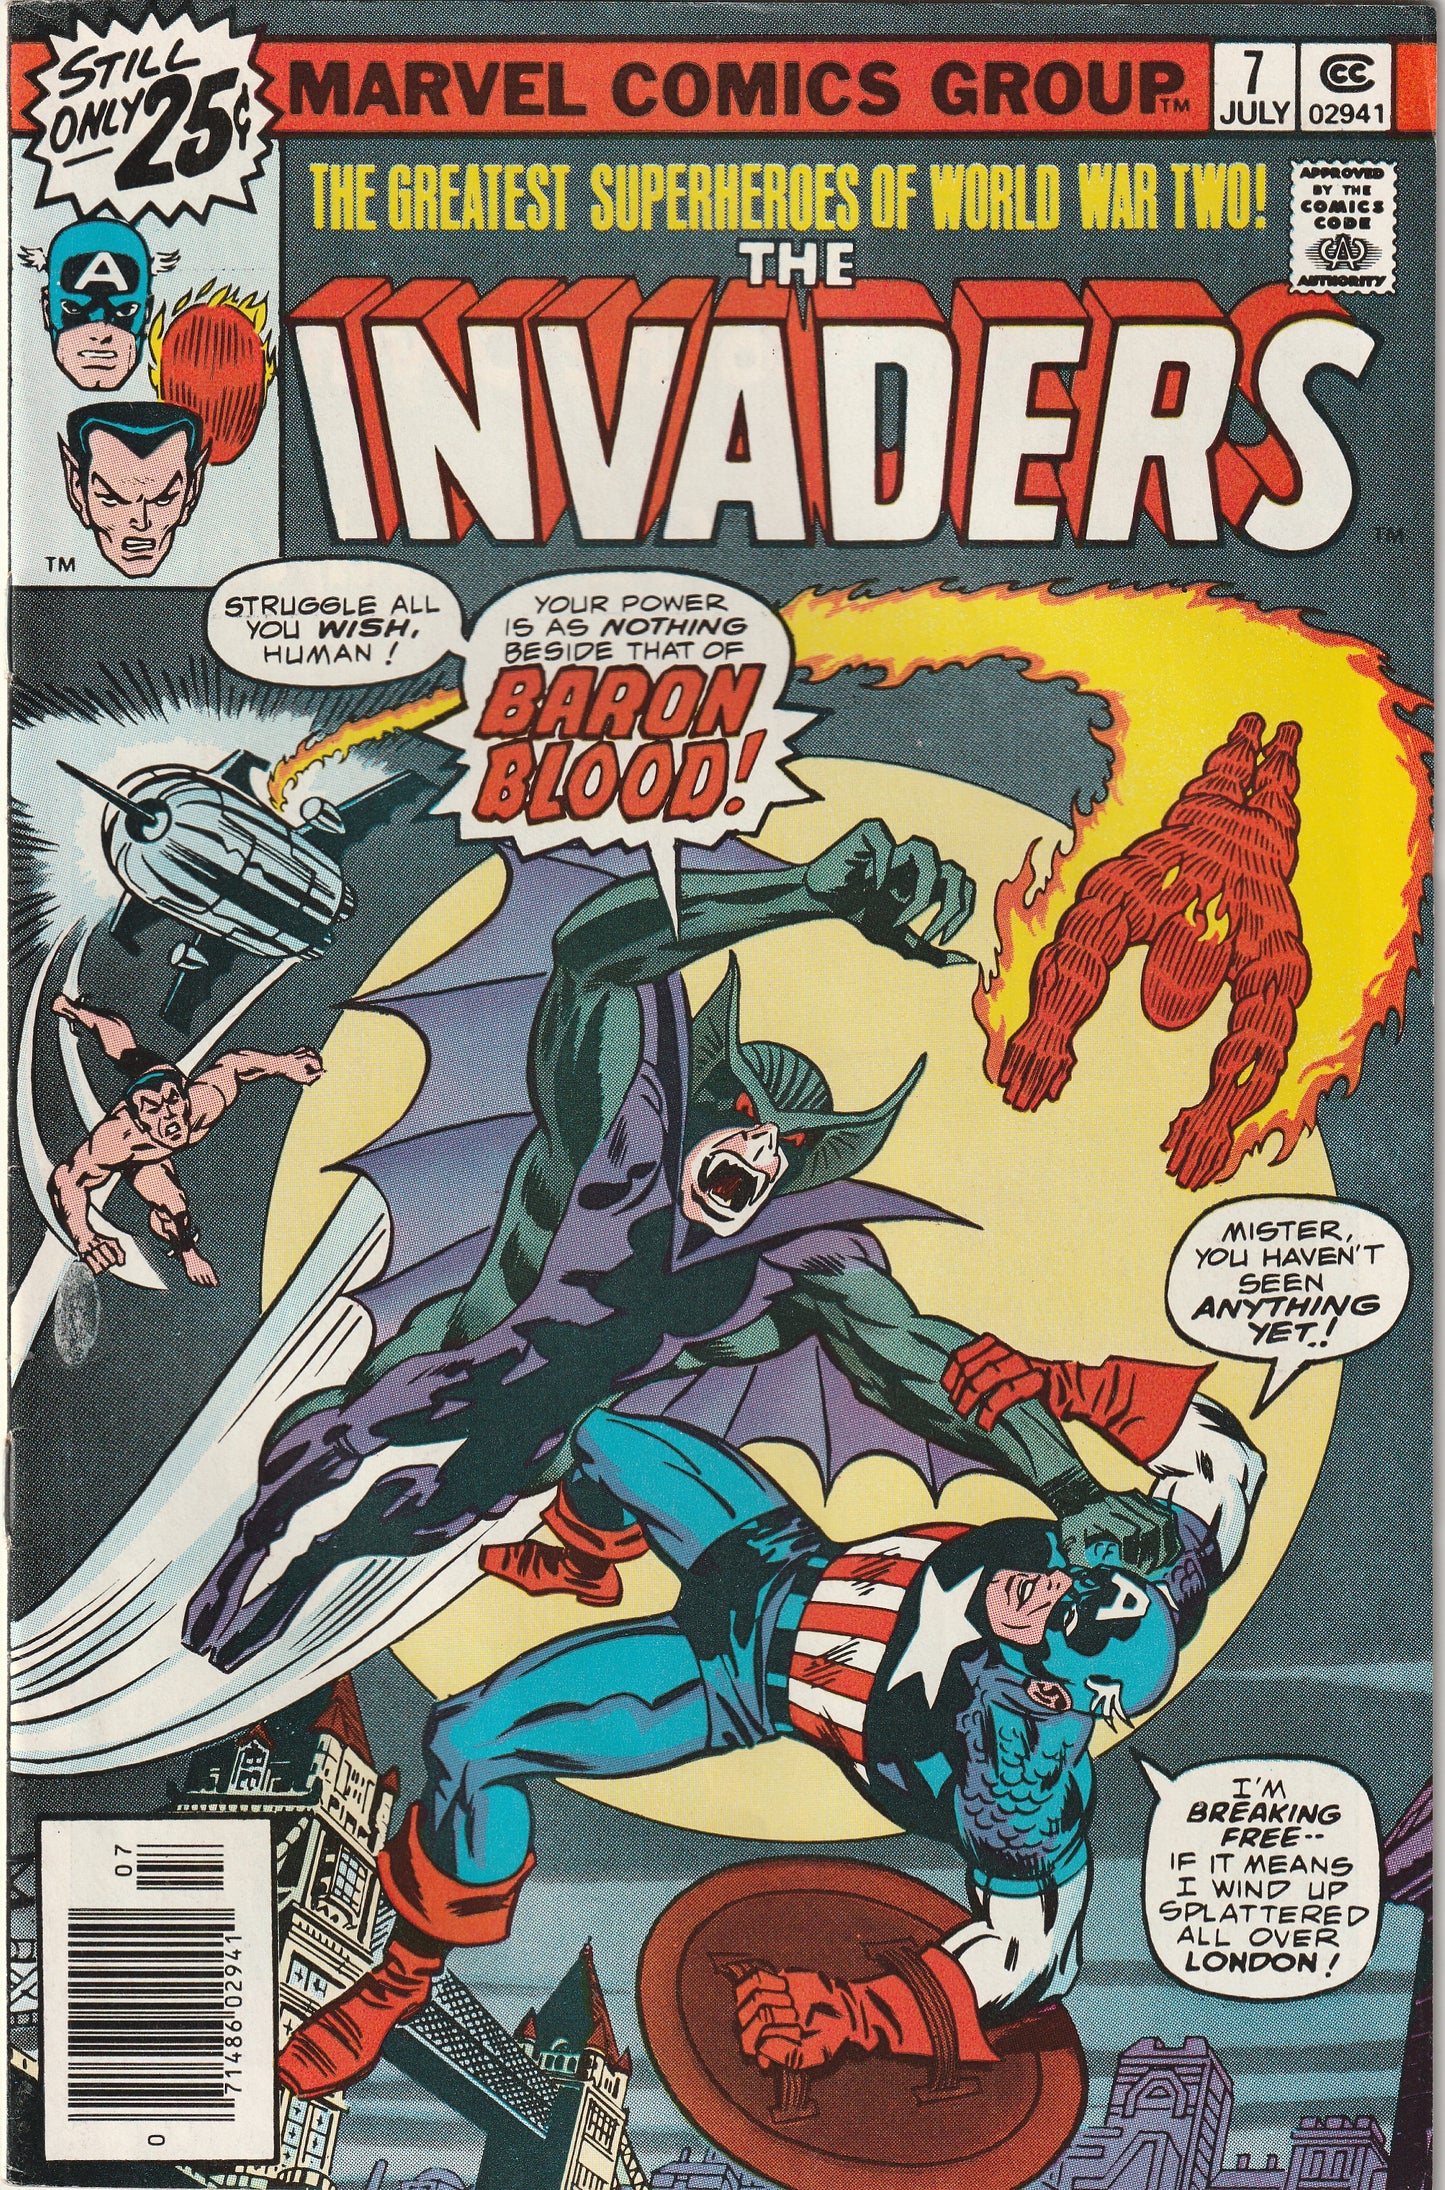 The Invaders #7 (1976) - 1st Appearance of Lady Jacqueline Falsworth Crichton, Baron Blood and Union Jack